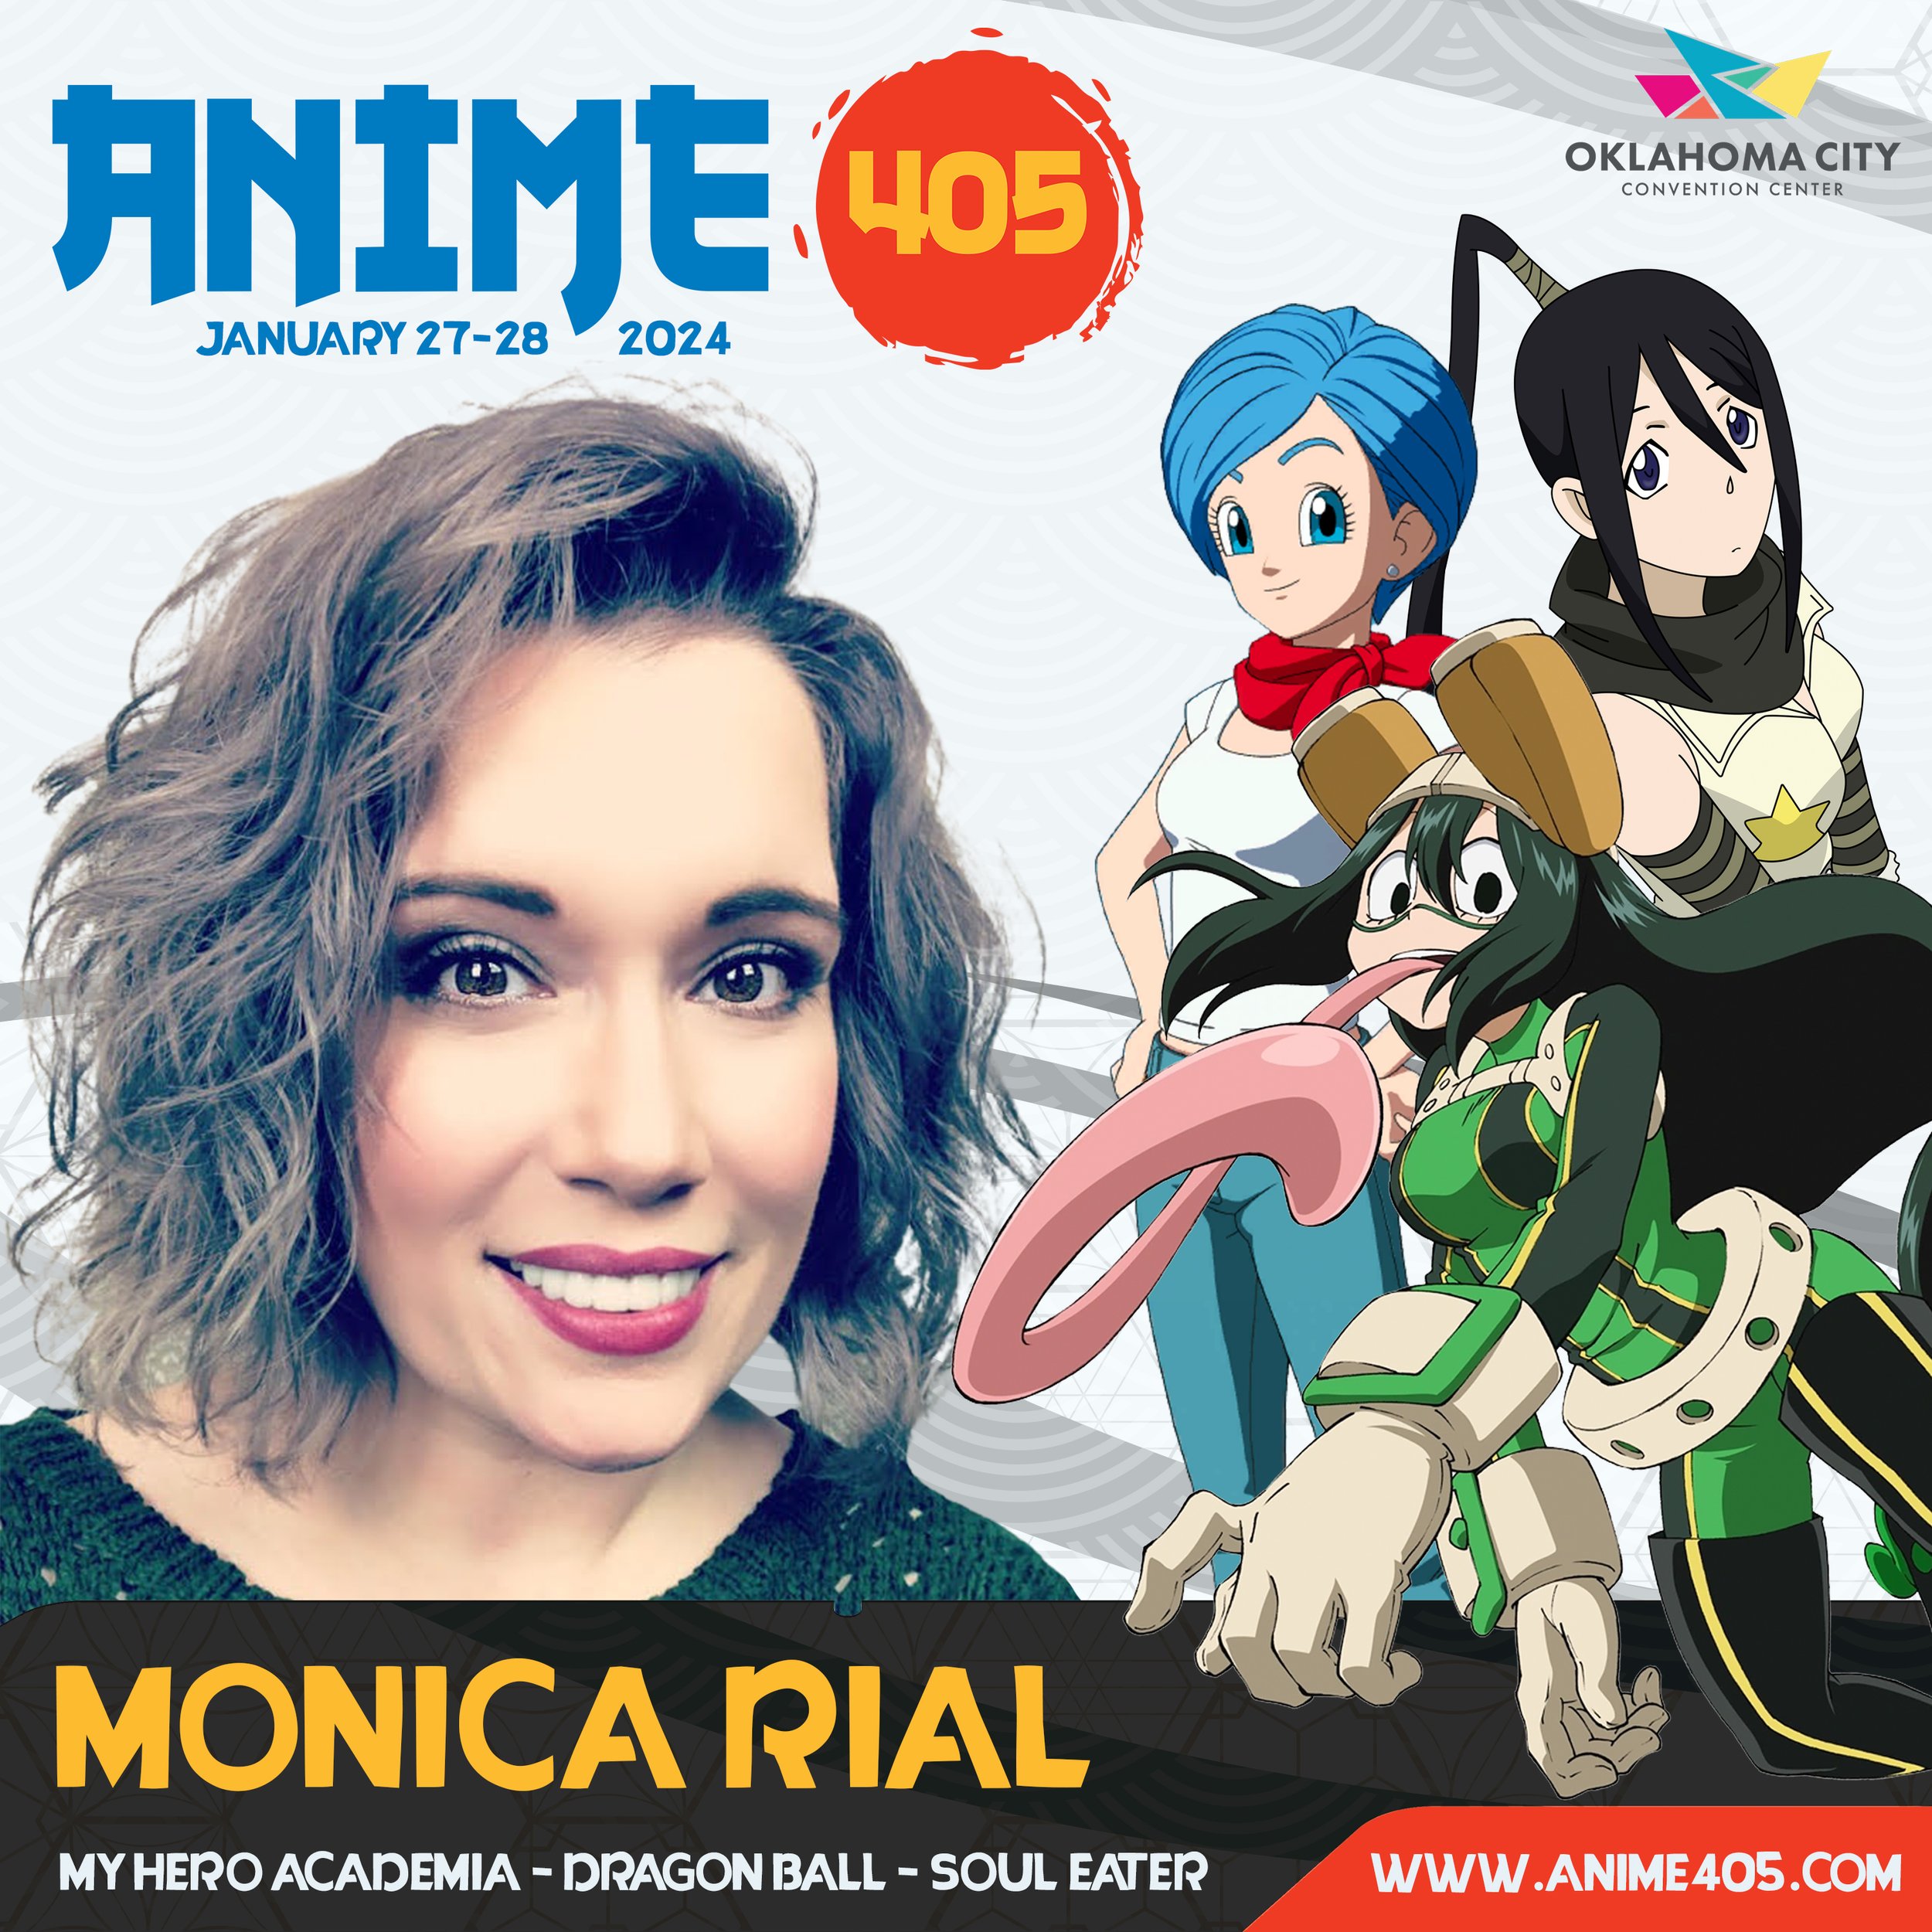 Anime 405  Tickets Tickets at Oklahoma City Convention Center in Oklahoma  City by Anime 405  Tixr